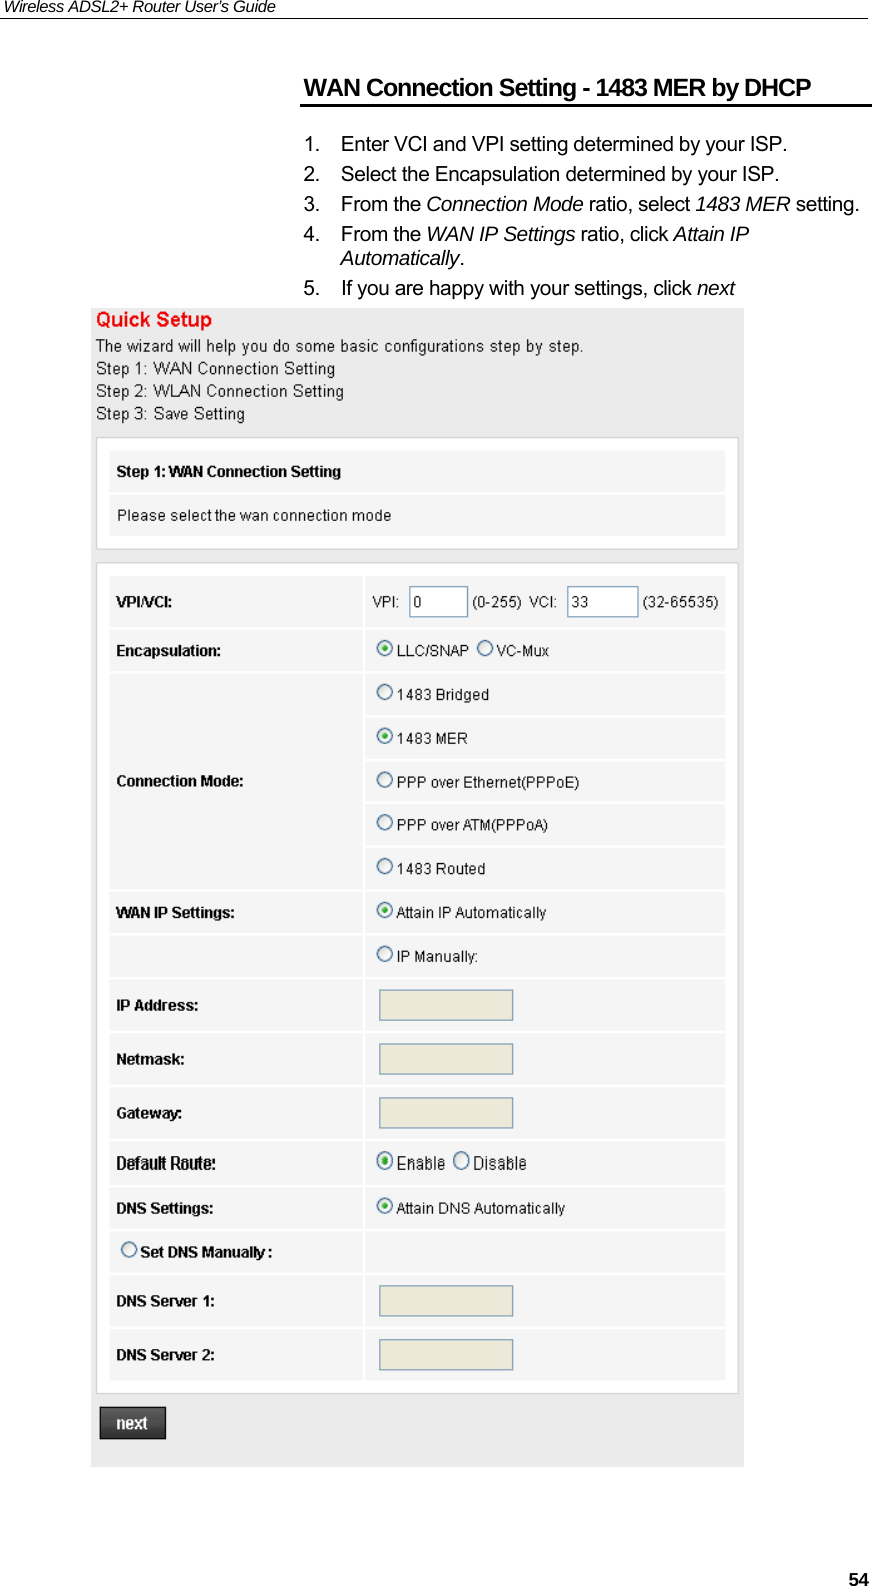 Wireless ADSL2+ Router User’s Guide     54WAN Connection Setting - 1483 MER by DHCP 1.  Enter VCI and VPI setting determined by your ISP. 2.  Select the Encapsulation determined by your ISP. 3. From the Connection Mode ratio, select 1483 MER setting. 4. From the WAN IP Settings ratio, click Attain IP Automatically. 5.  If you are happy with your settings, click next   